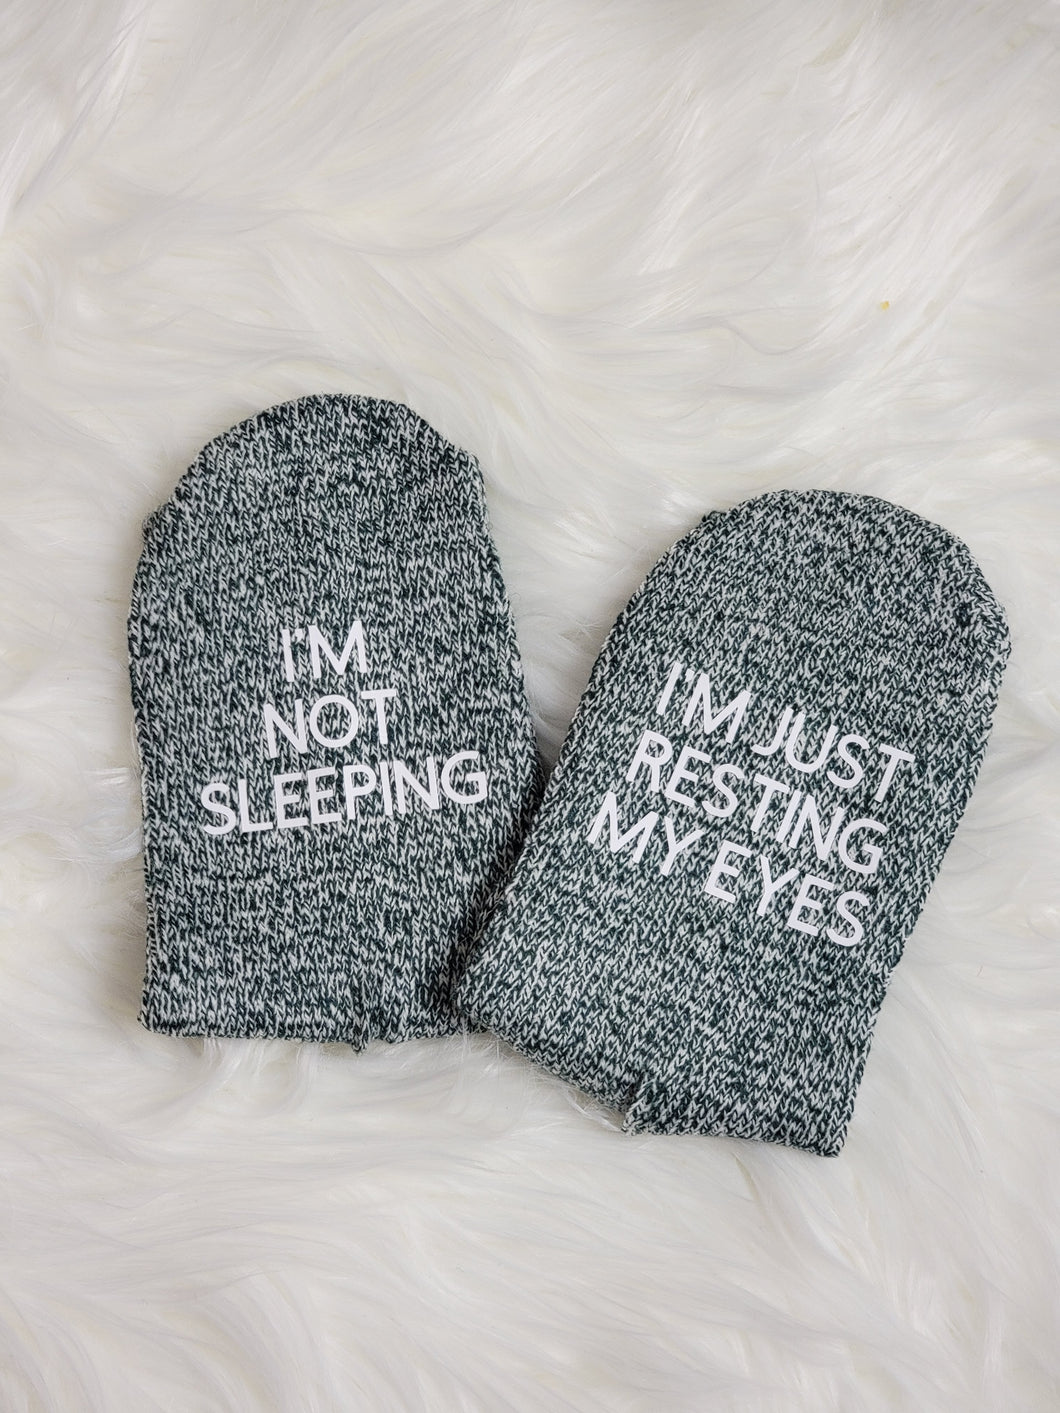 One pair of green socks are laying on a white fuzzy rug. The socks are folded so that you can see the soles, where there is text in white. On one sock it says I'm not sleeping. On the other it says I'm just resting my eyes.